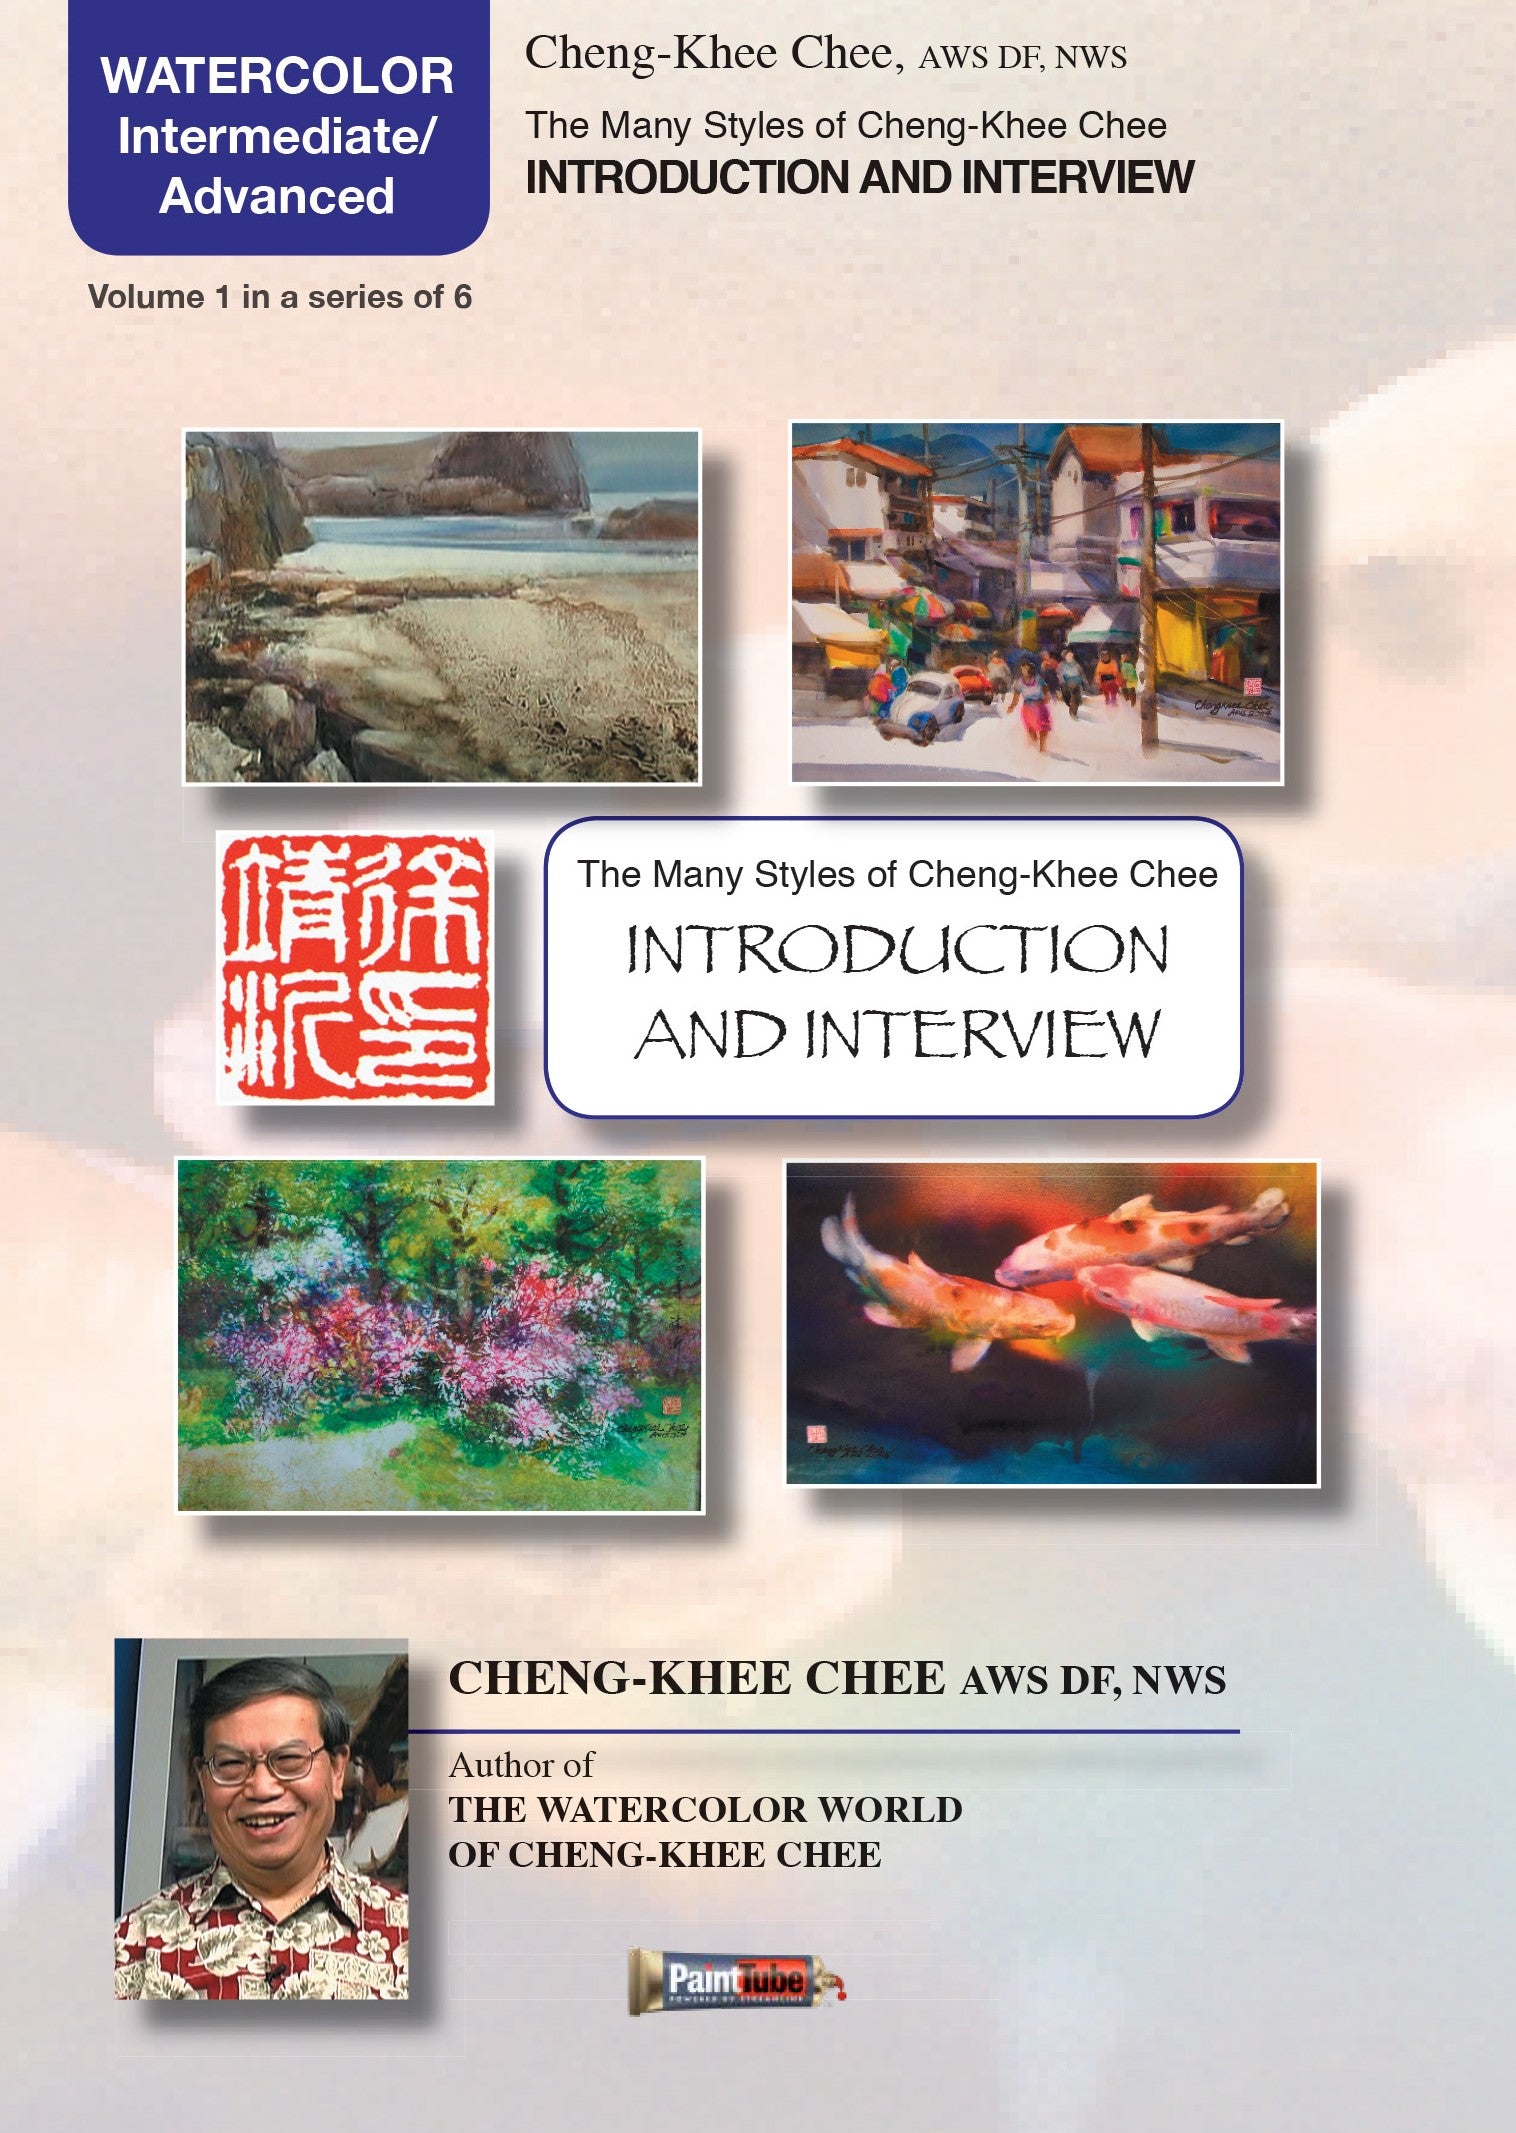 Cheng-Khee Chee: The Many Styles of Cheng-Khee Chee - Introduction & Interview